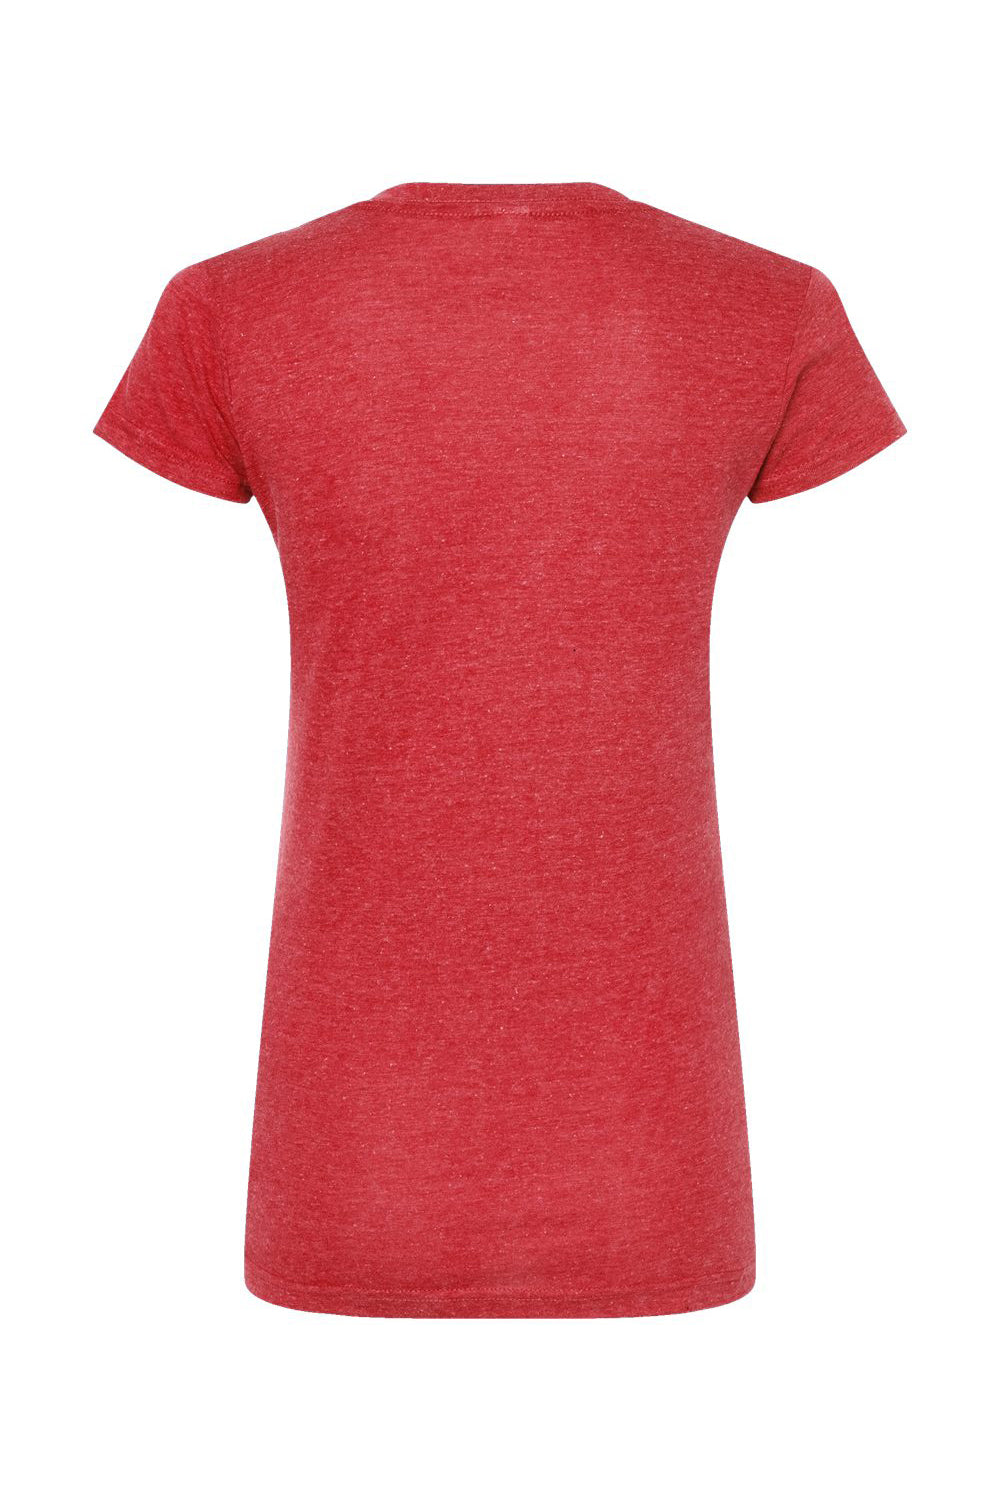 Tultex 244 Womens Poly-Rich Short Sleeve V-Neck T-Shirt Heather Red Flat Back